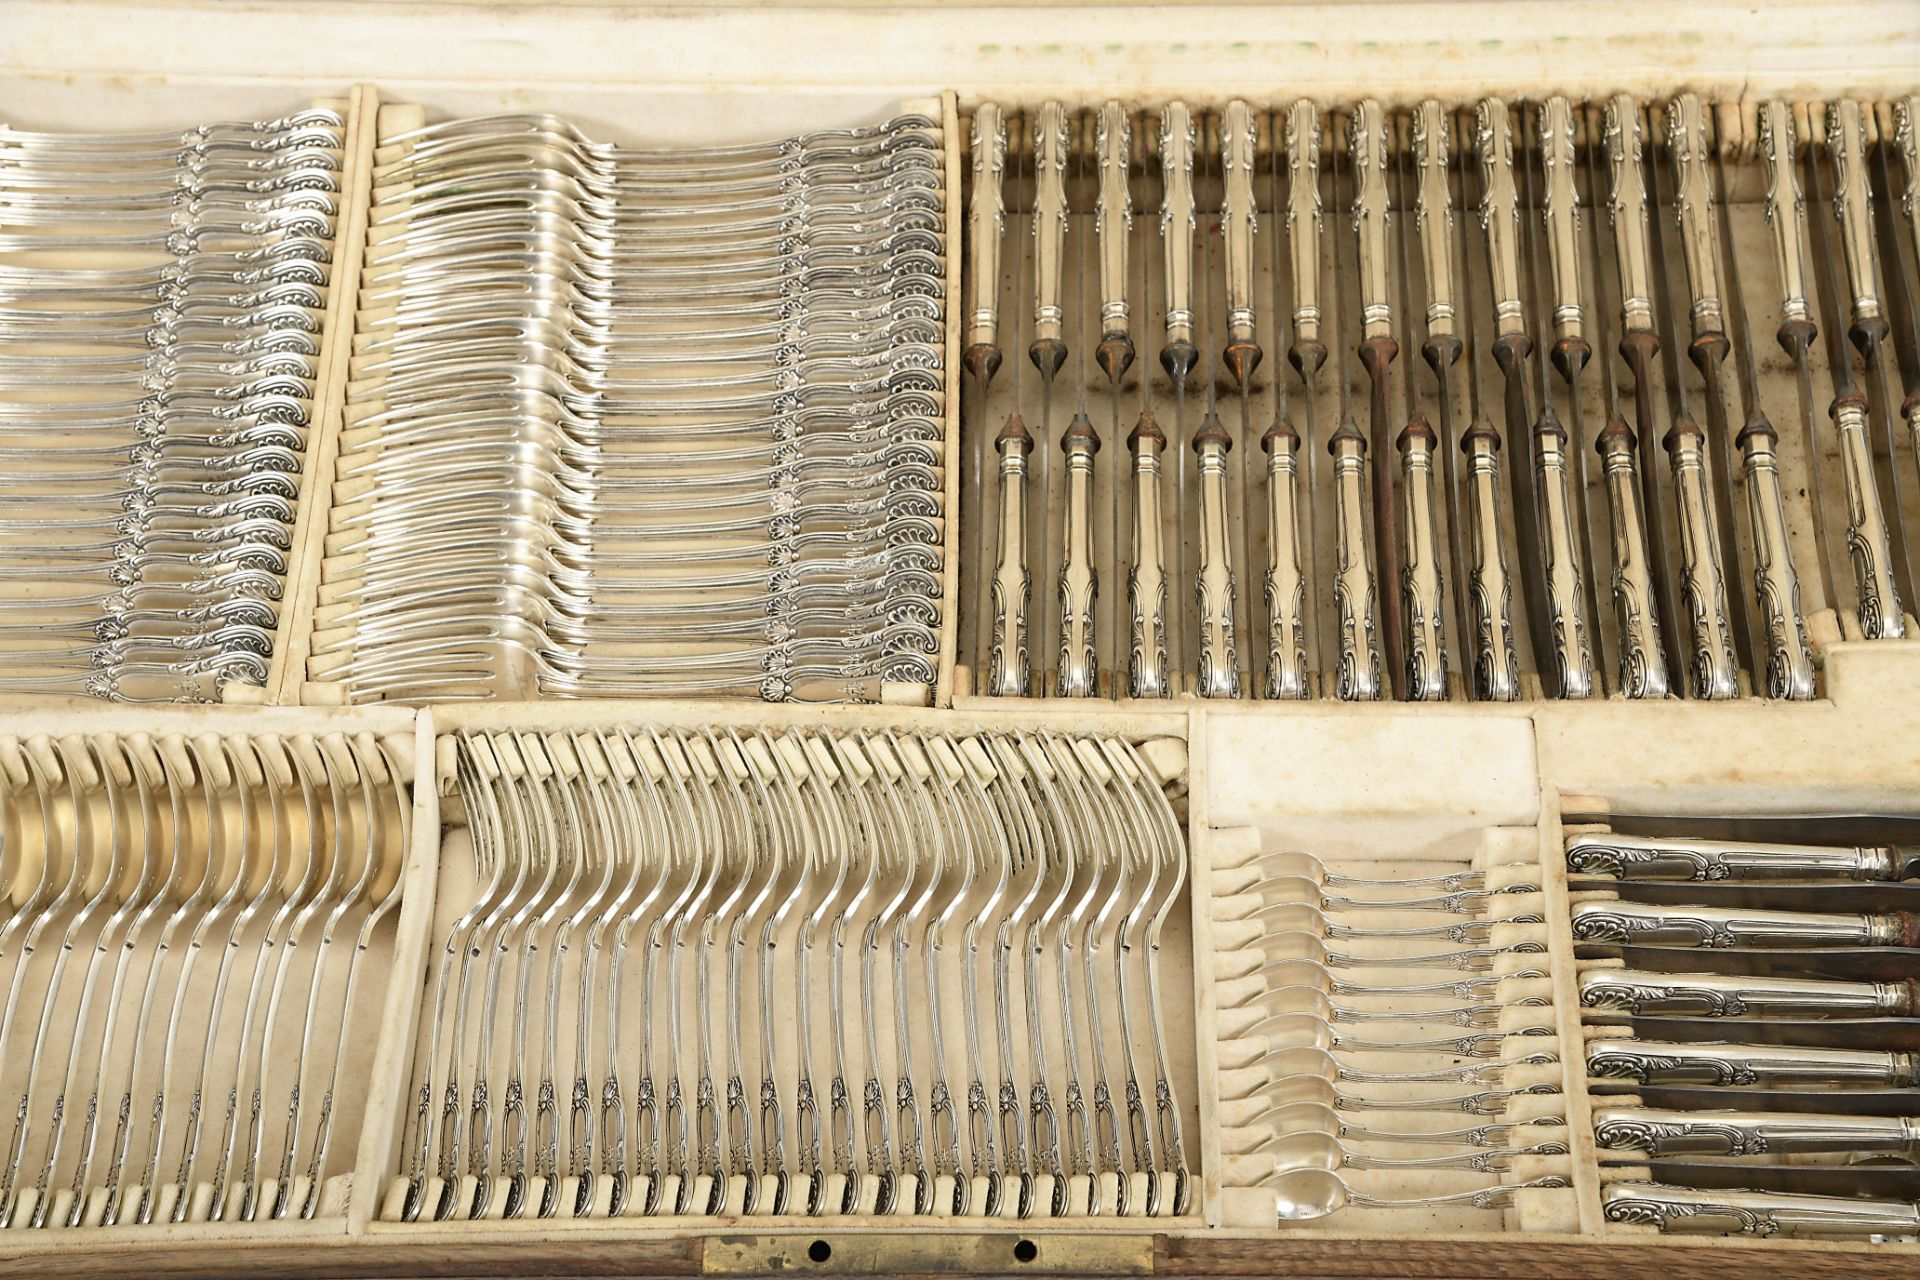 Flatware for 24 people - Image 4 of 6